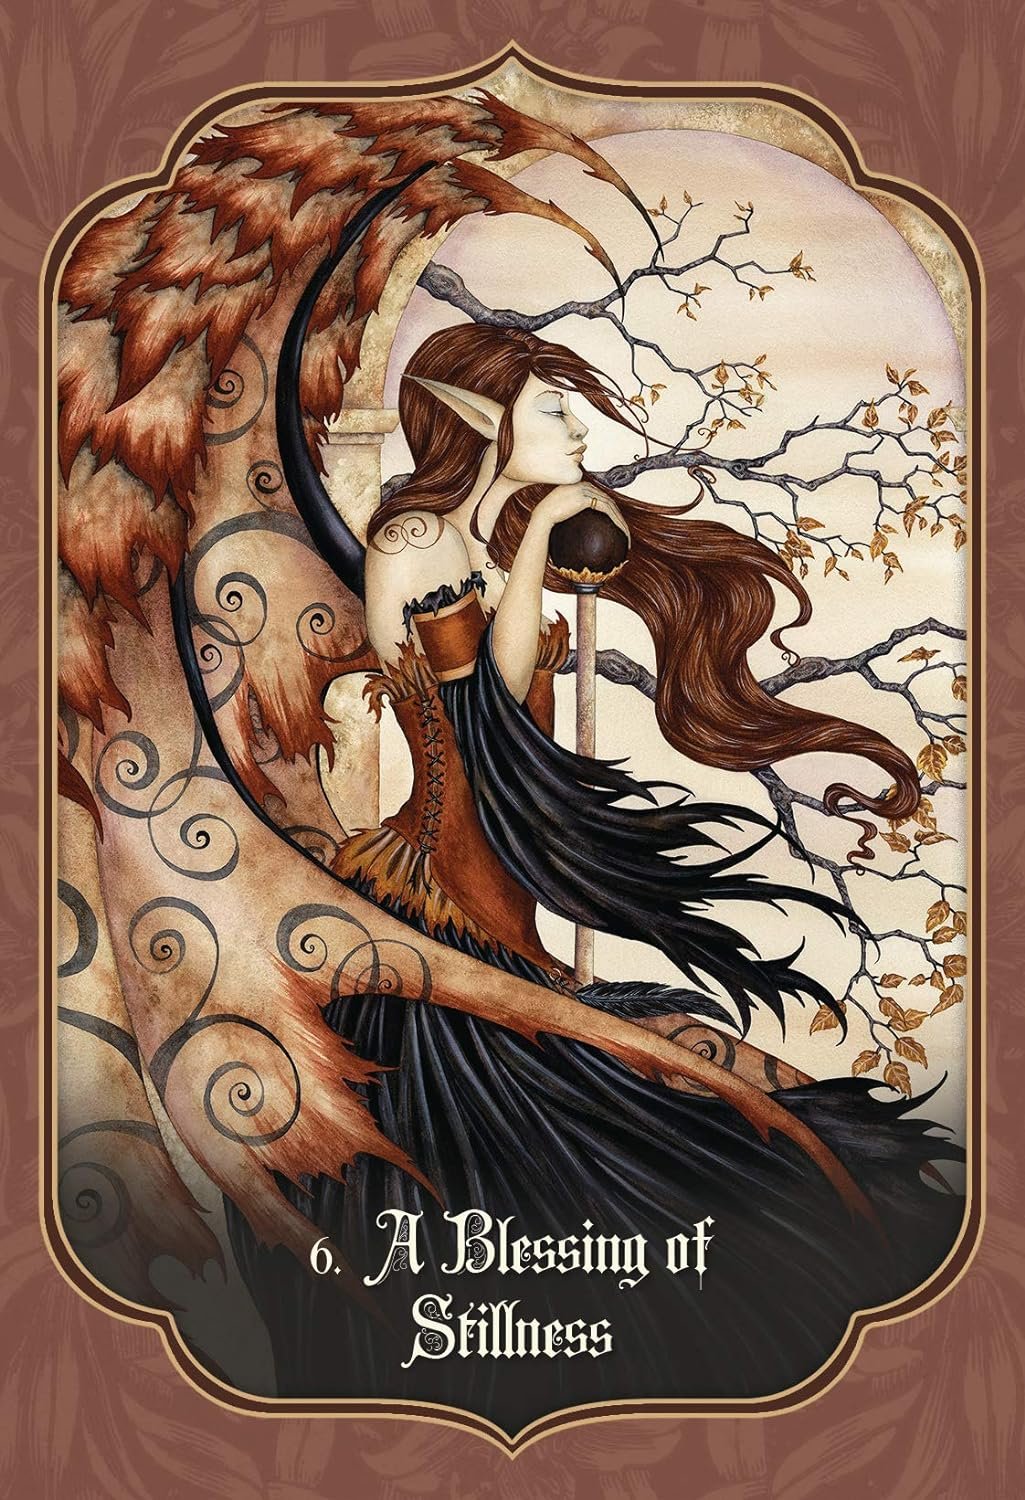 FAERY BLESSING CARDS: Healing Gifts and Shining Treasures from the Realm of Enchantment (435 cards & guidebook, boxed)